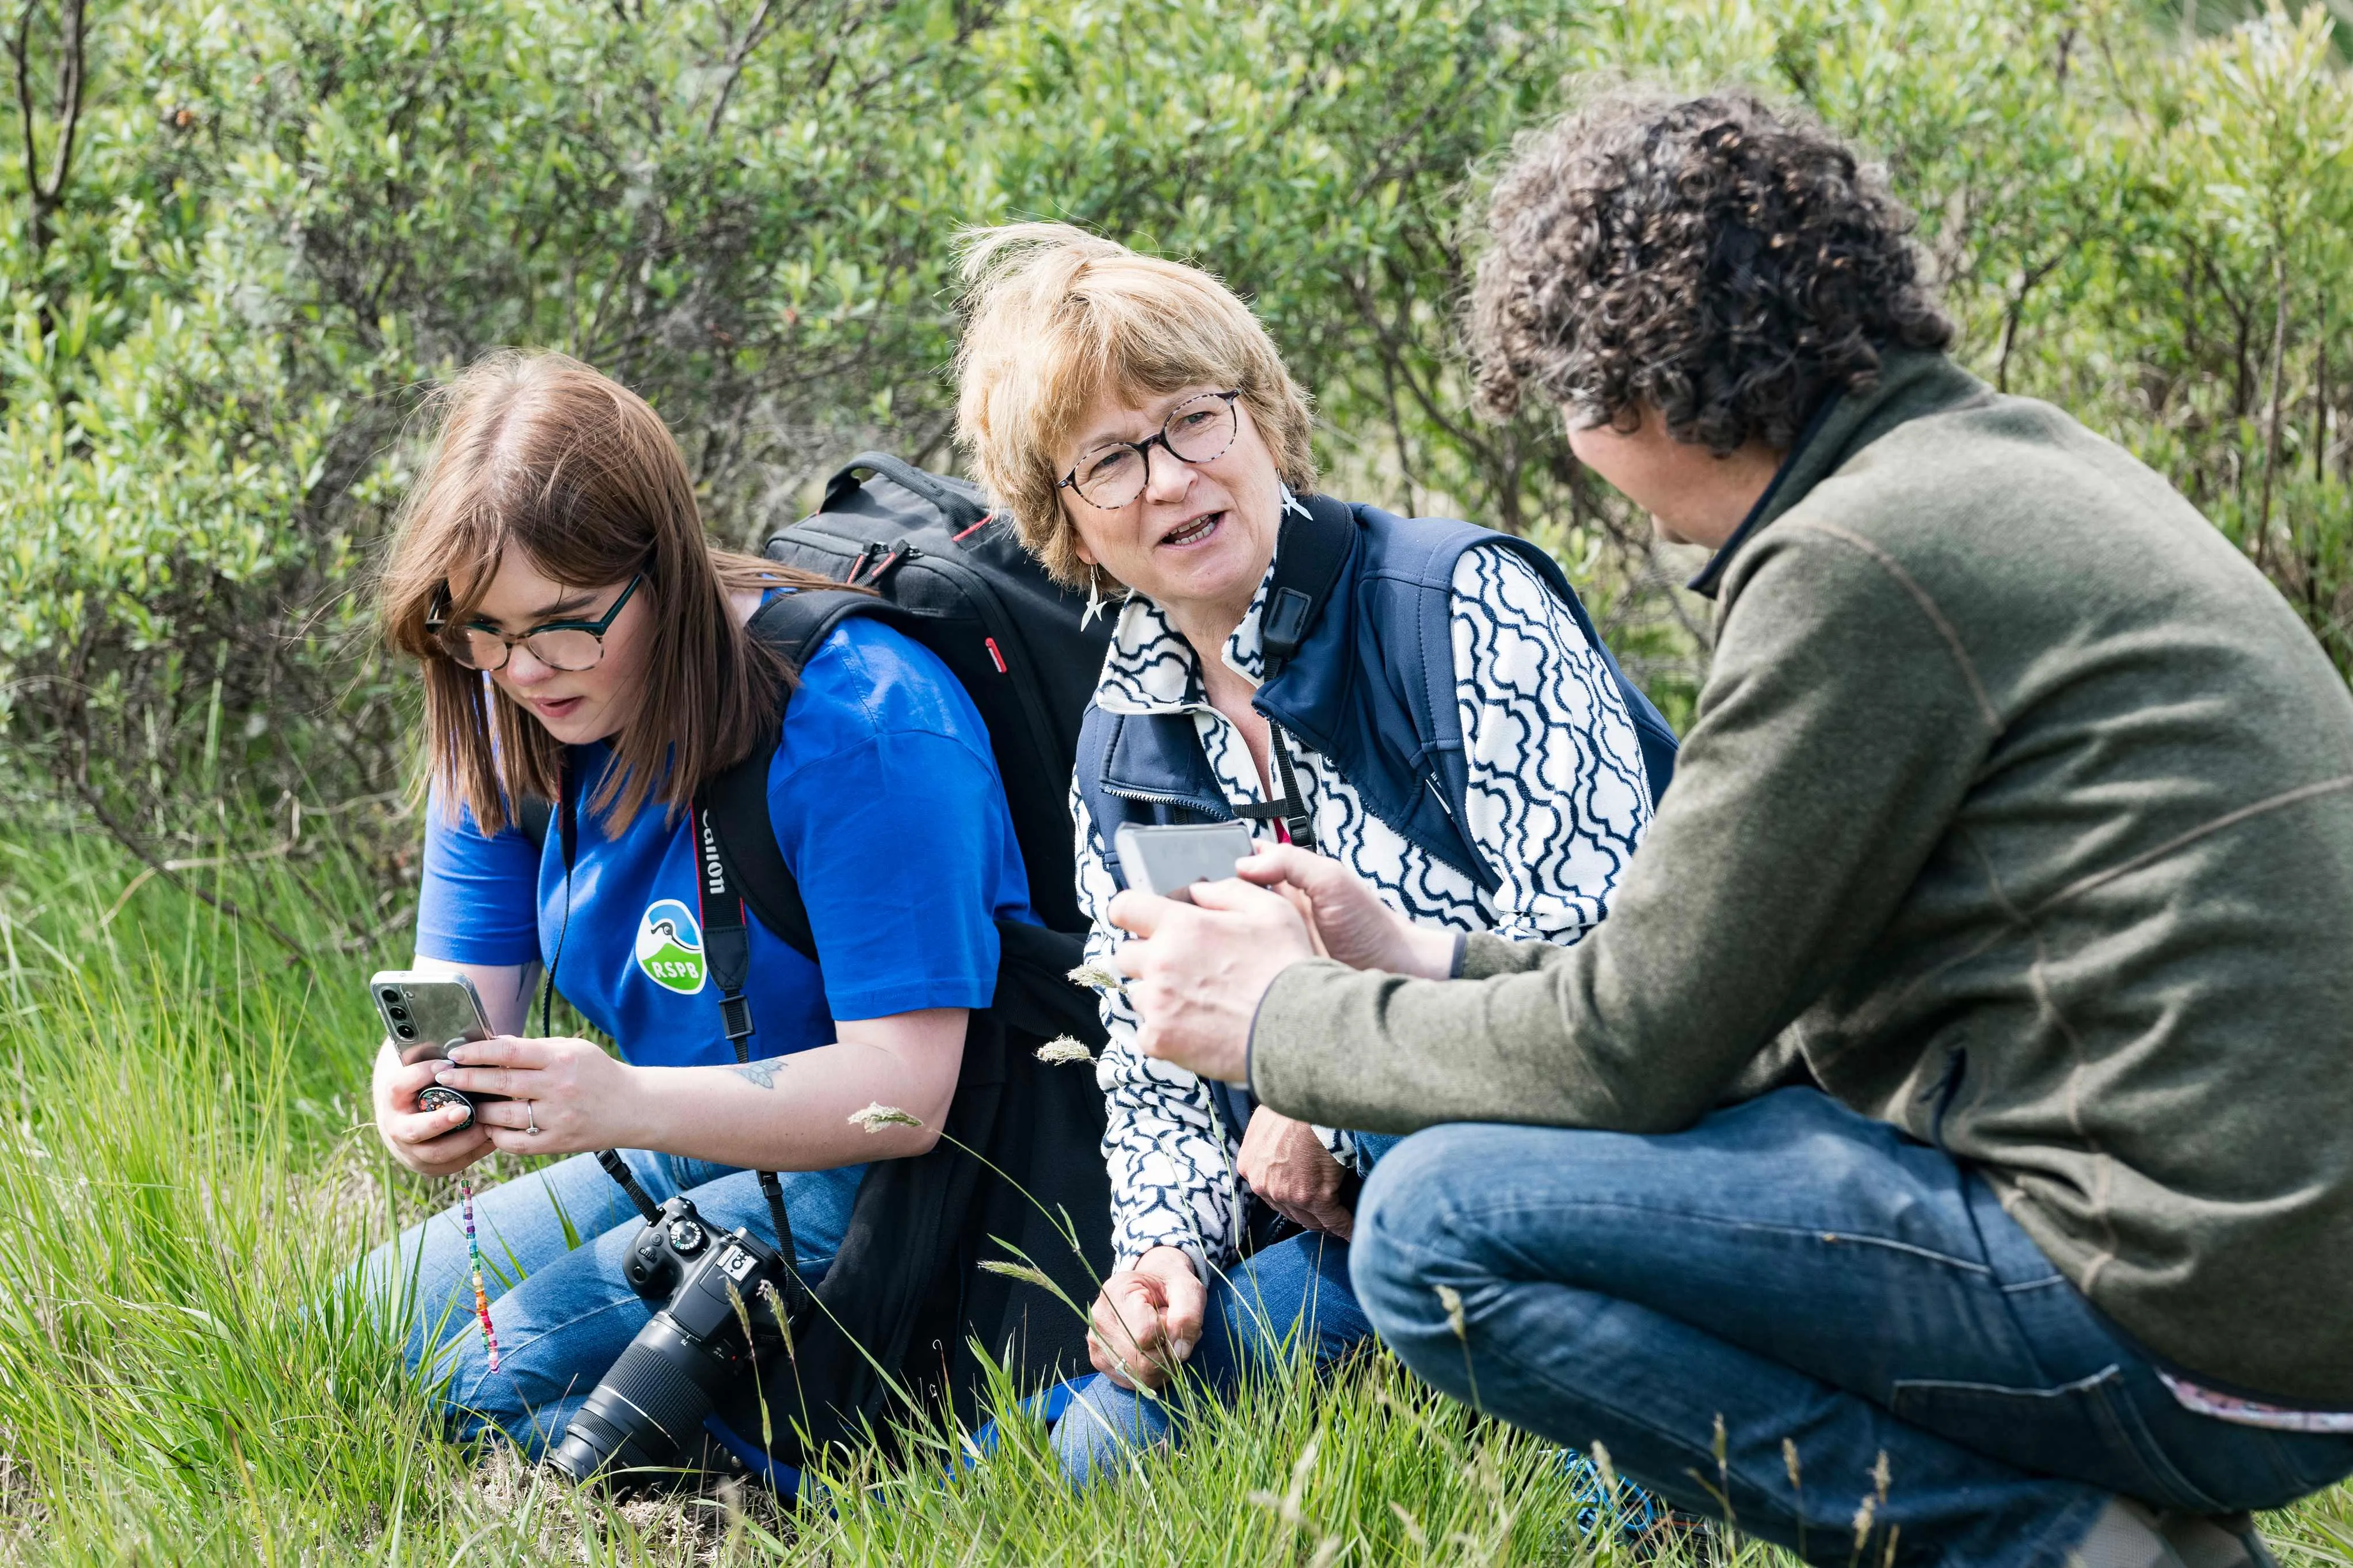 Three RSPB volunteers chatting together whilst sitting in grass.